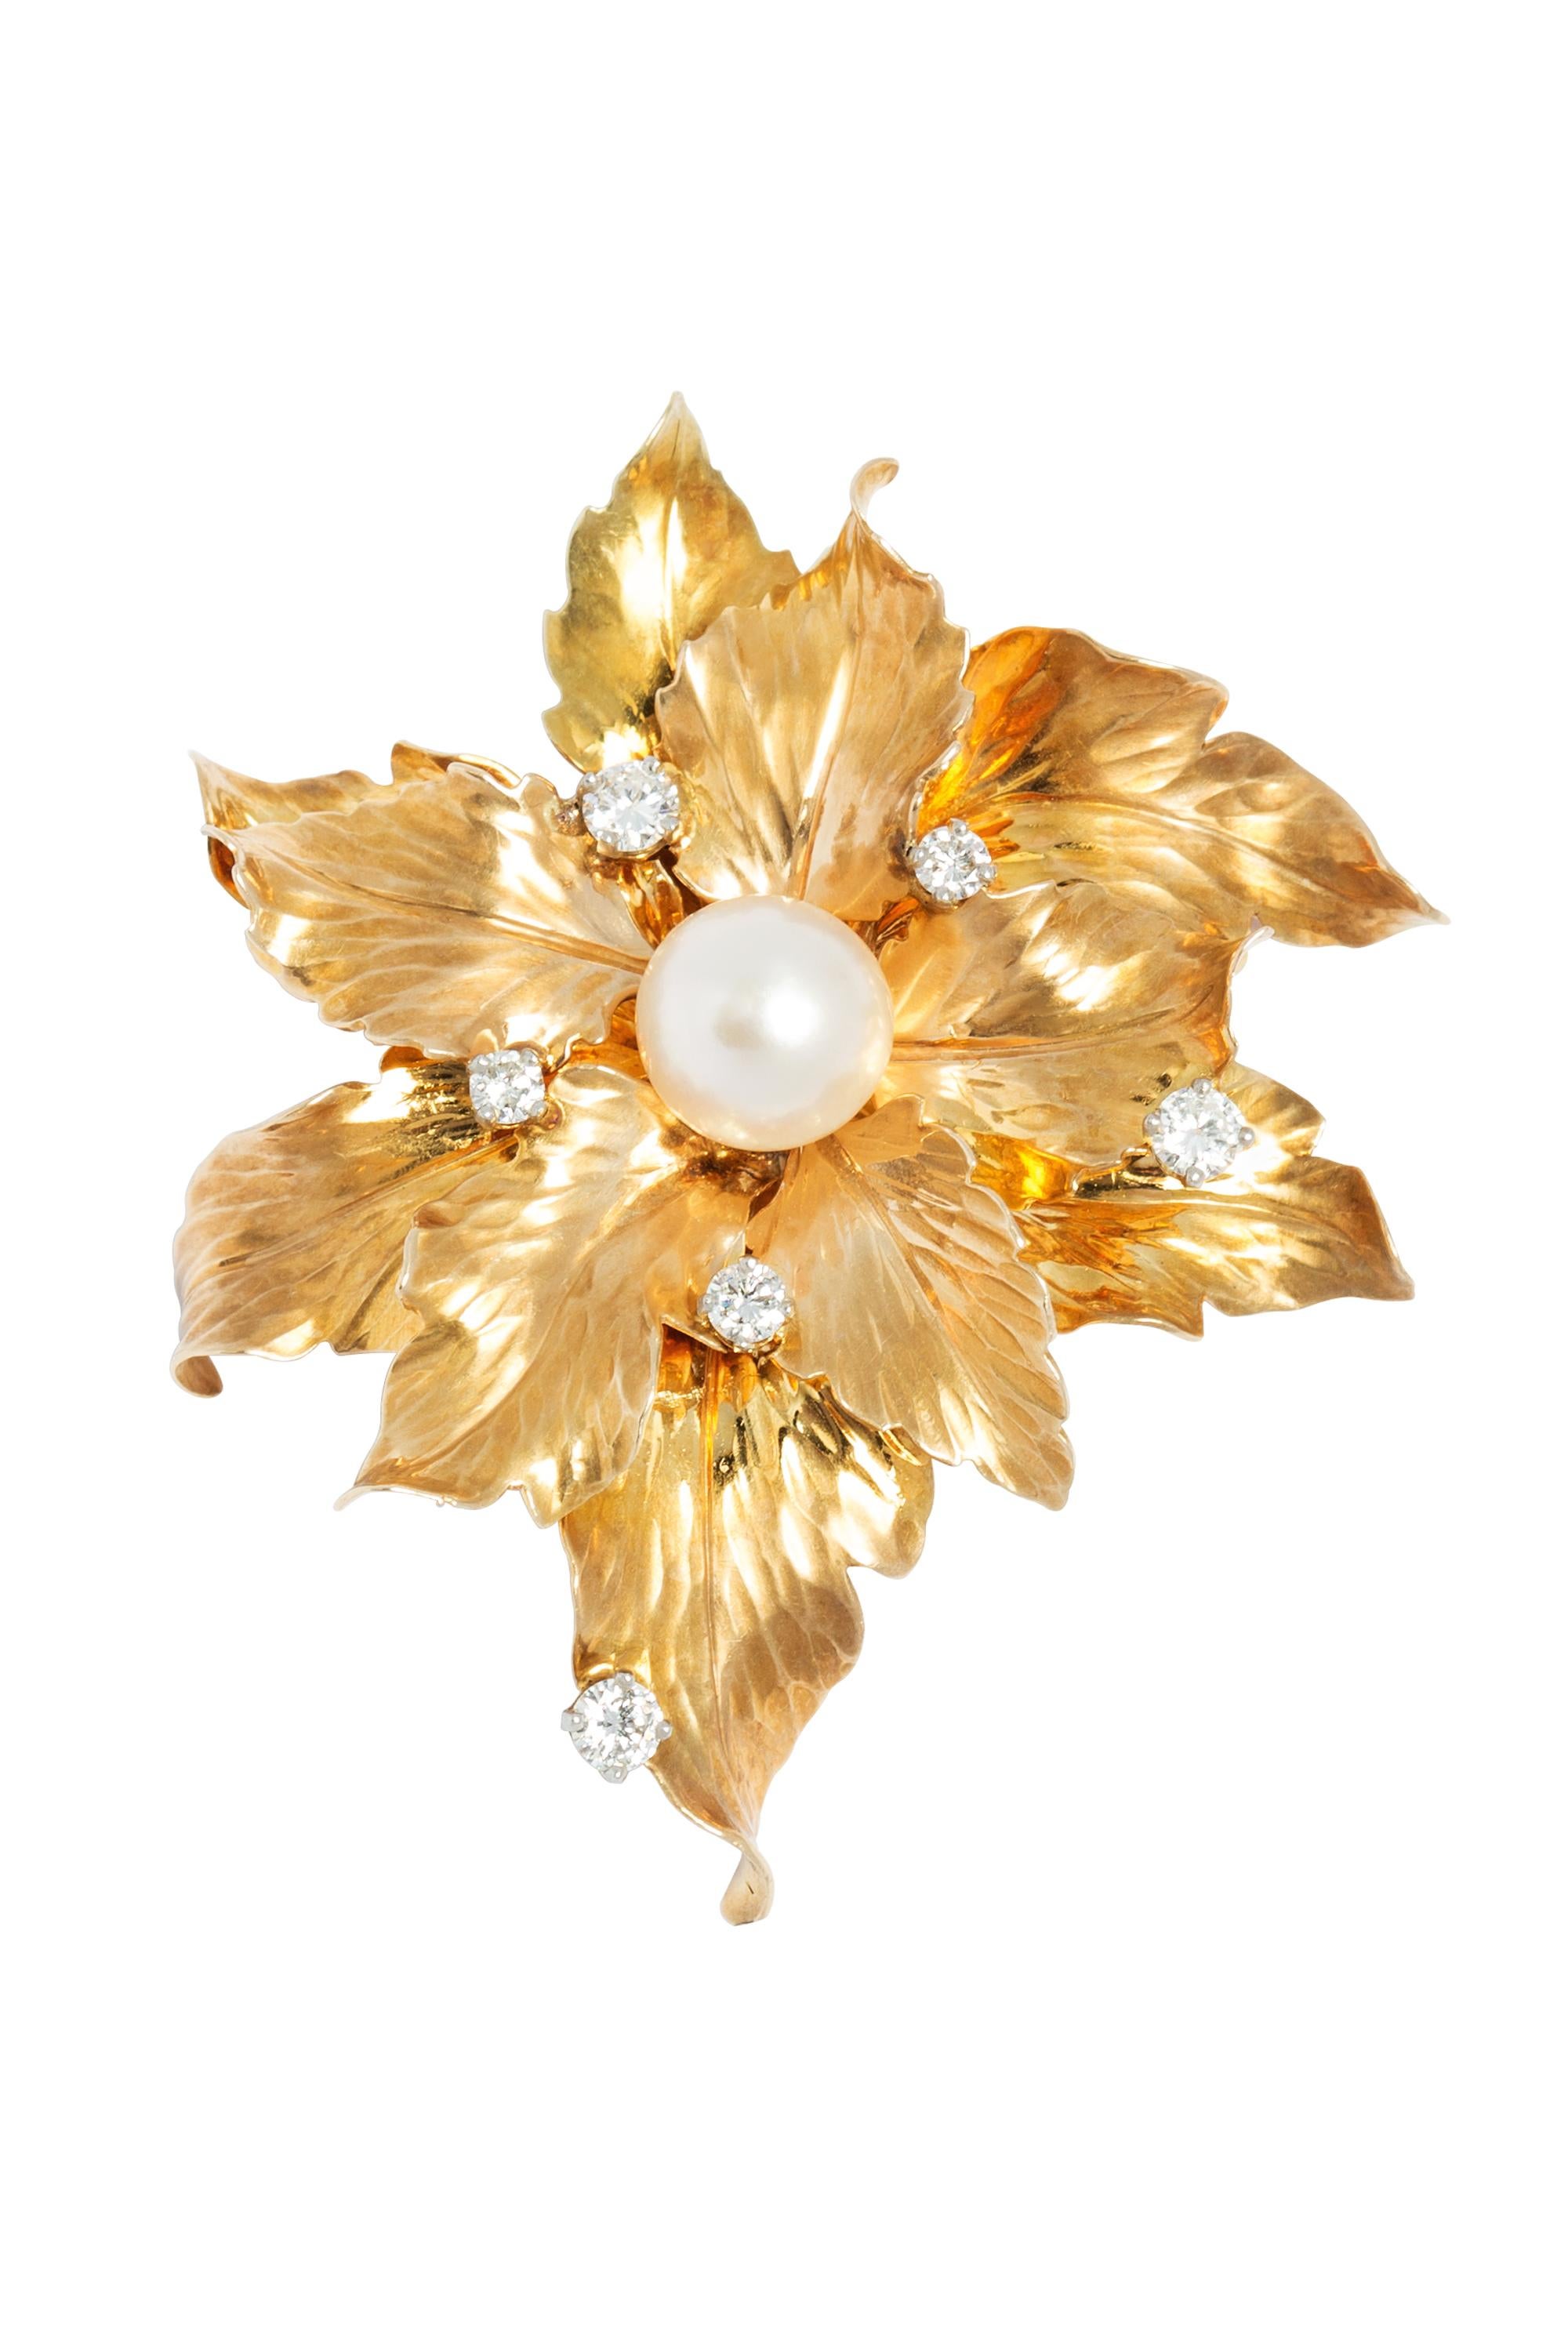 This wonderful large vintage brooch is comprised of an elegant arrangement of glossy leaves rendered in bright 14 karat yellow gold highlighted by six sparkling round brilliant diamonds with a softly gleaming 9 mm cultured pearl at the center. The